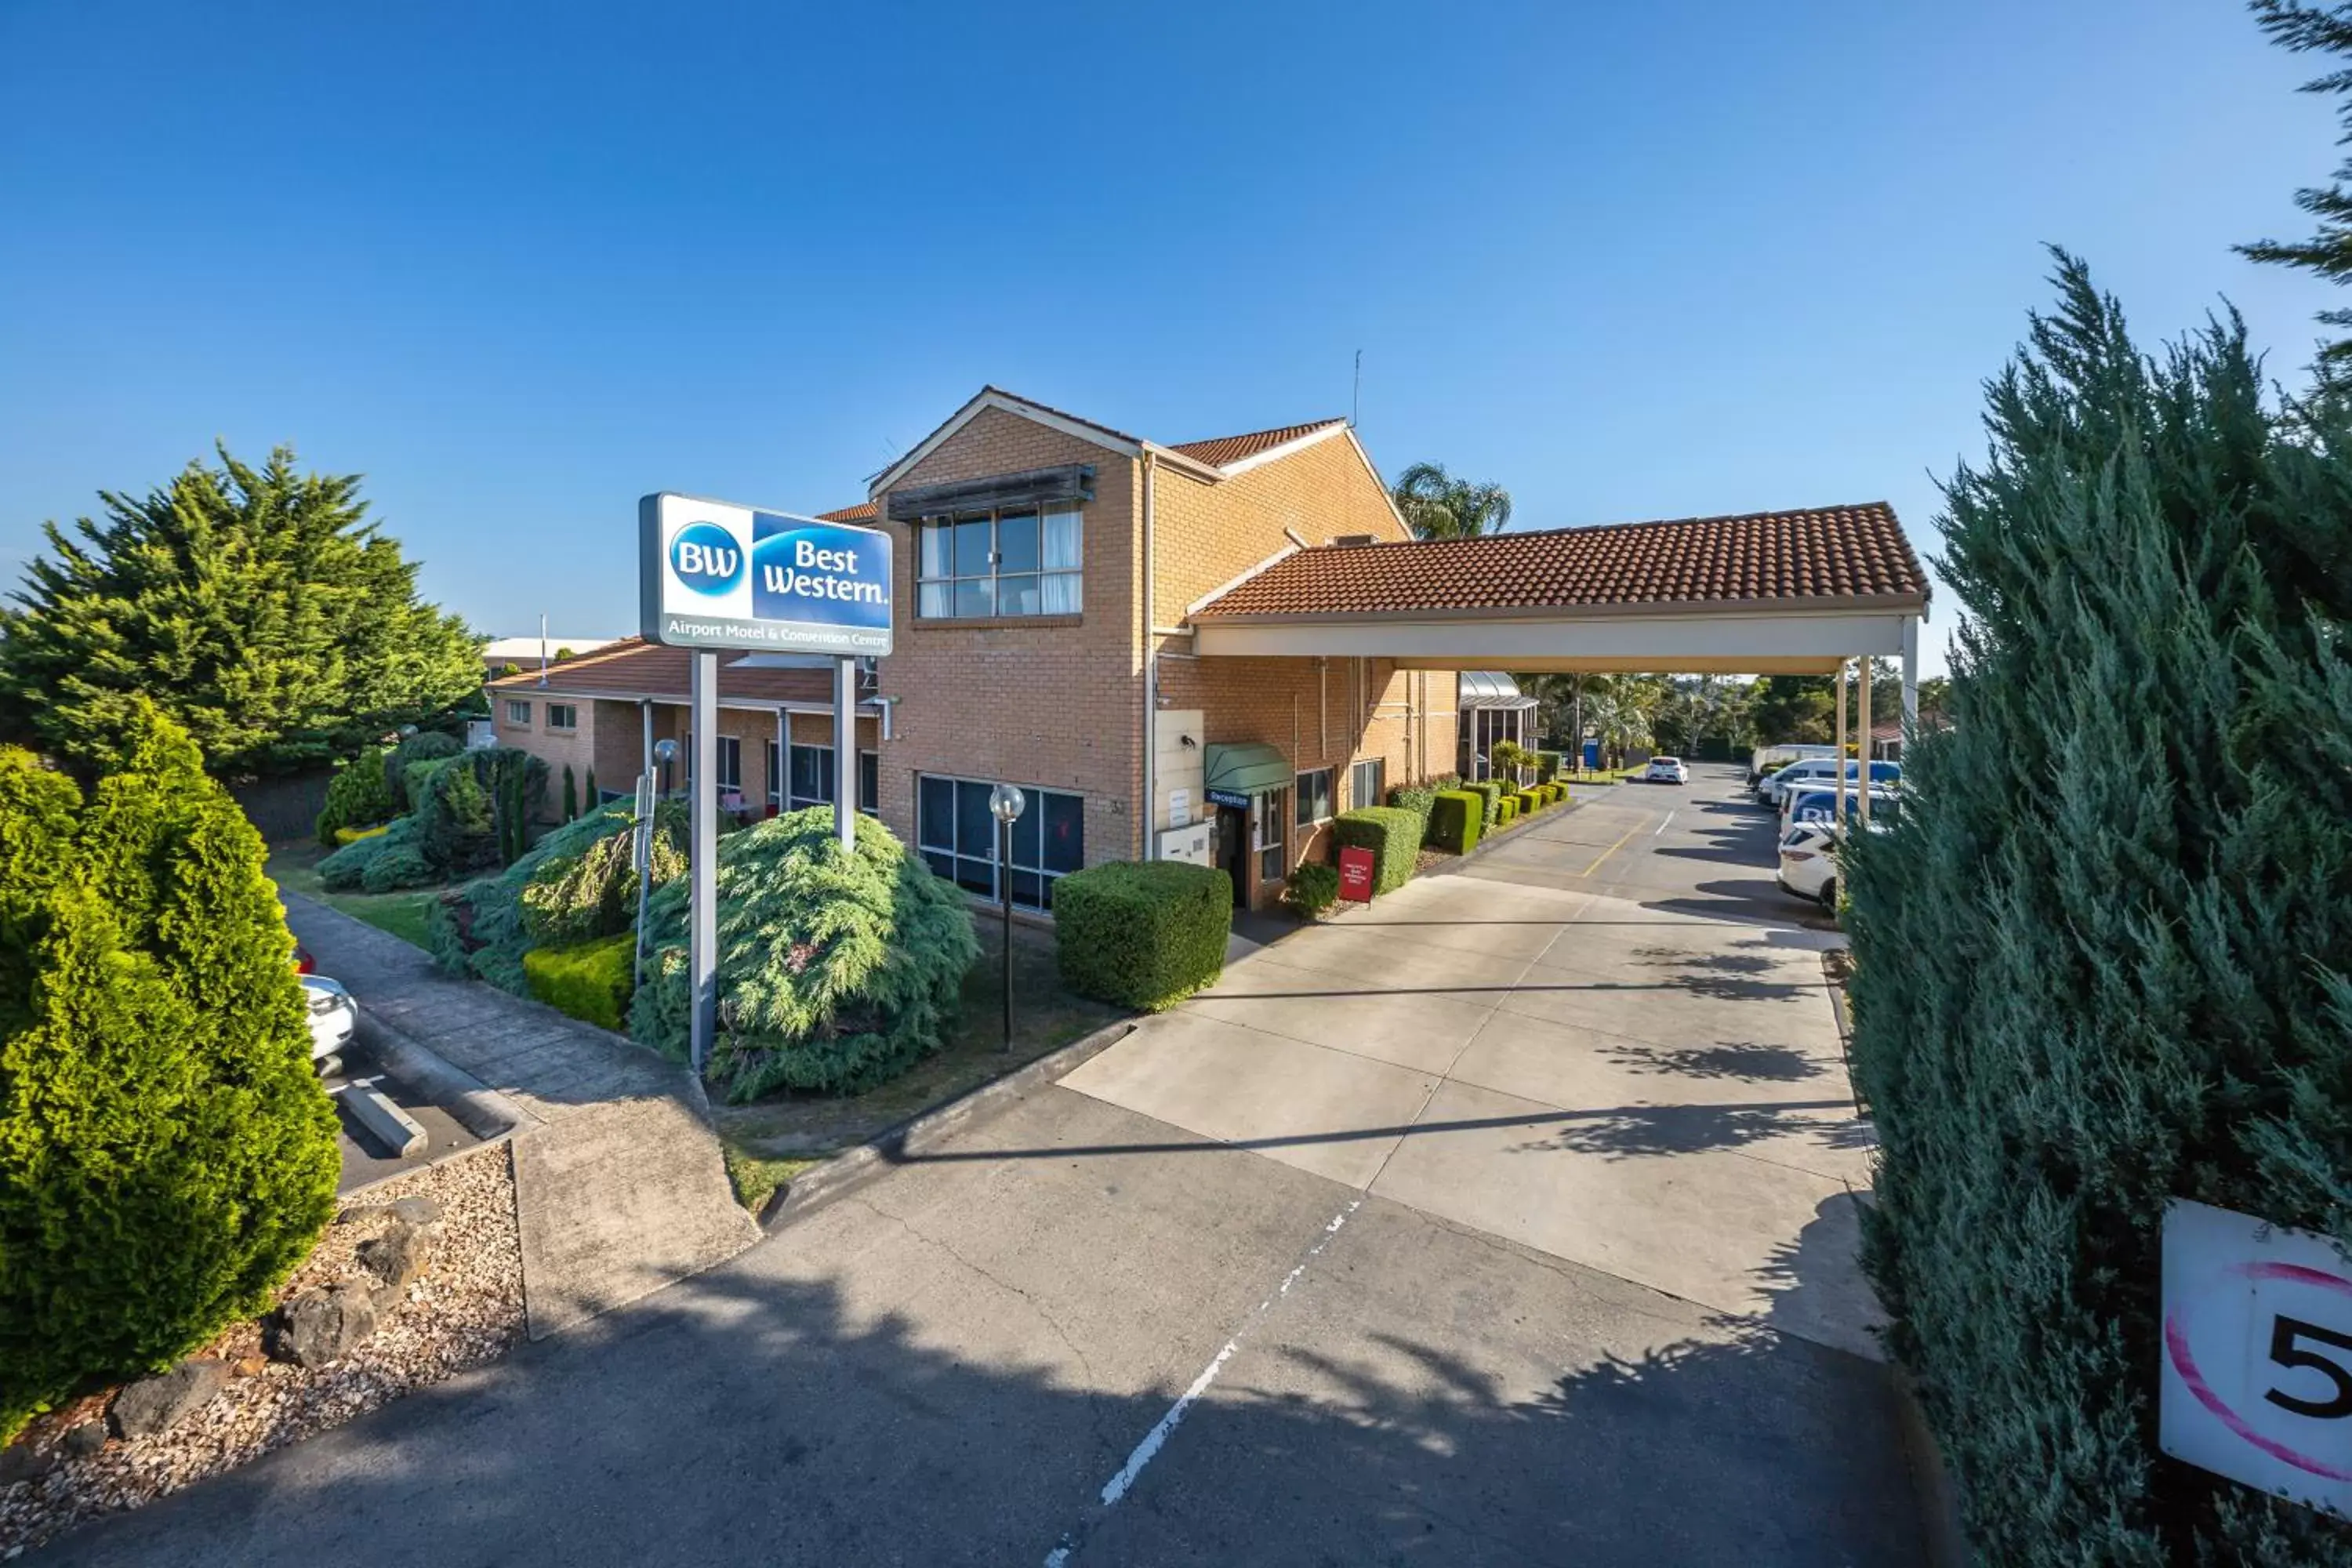 Property Building in Best Western Melbourne Airport